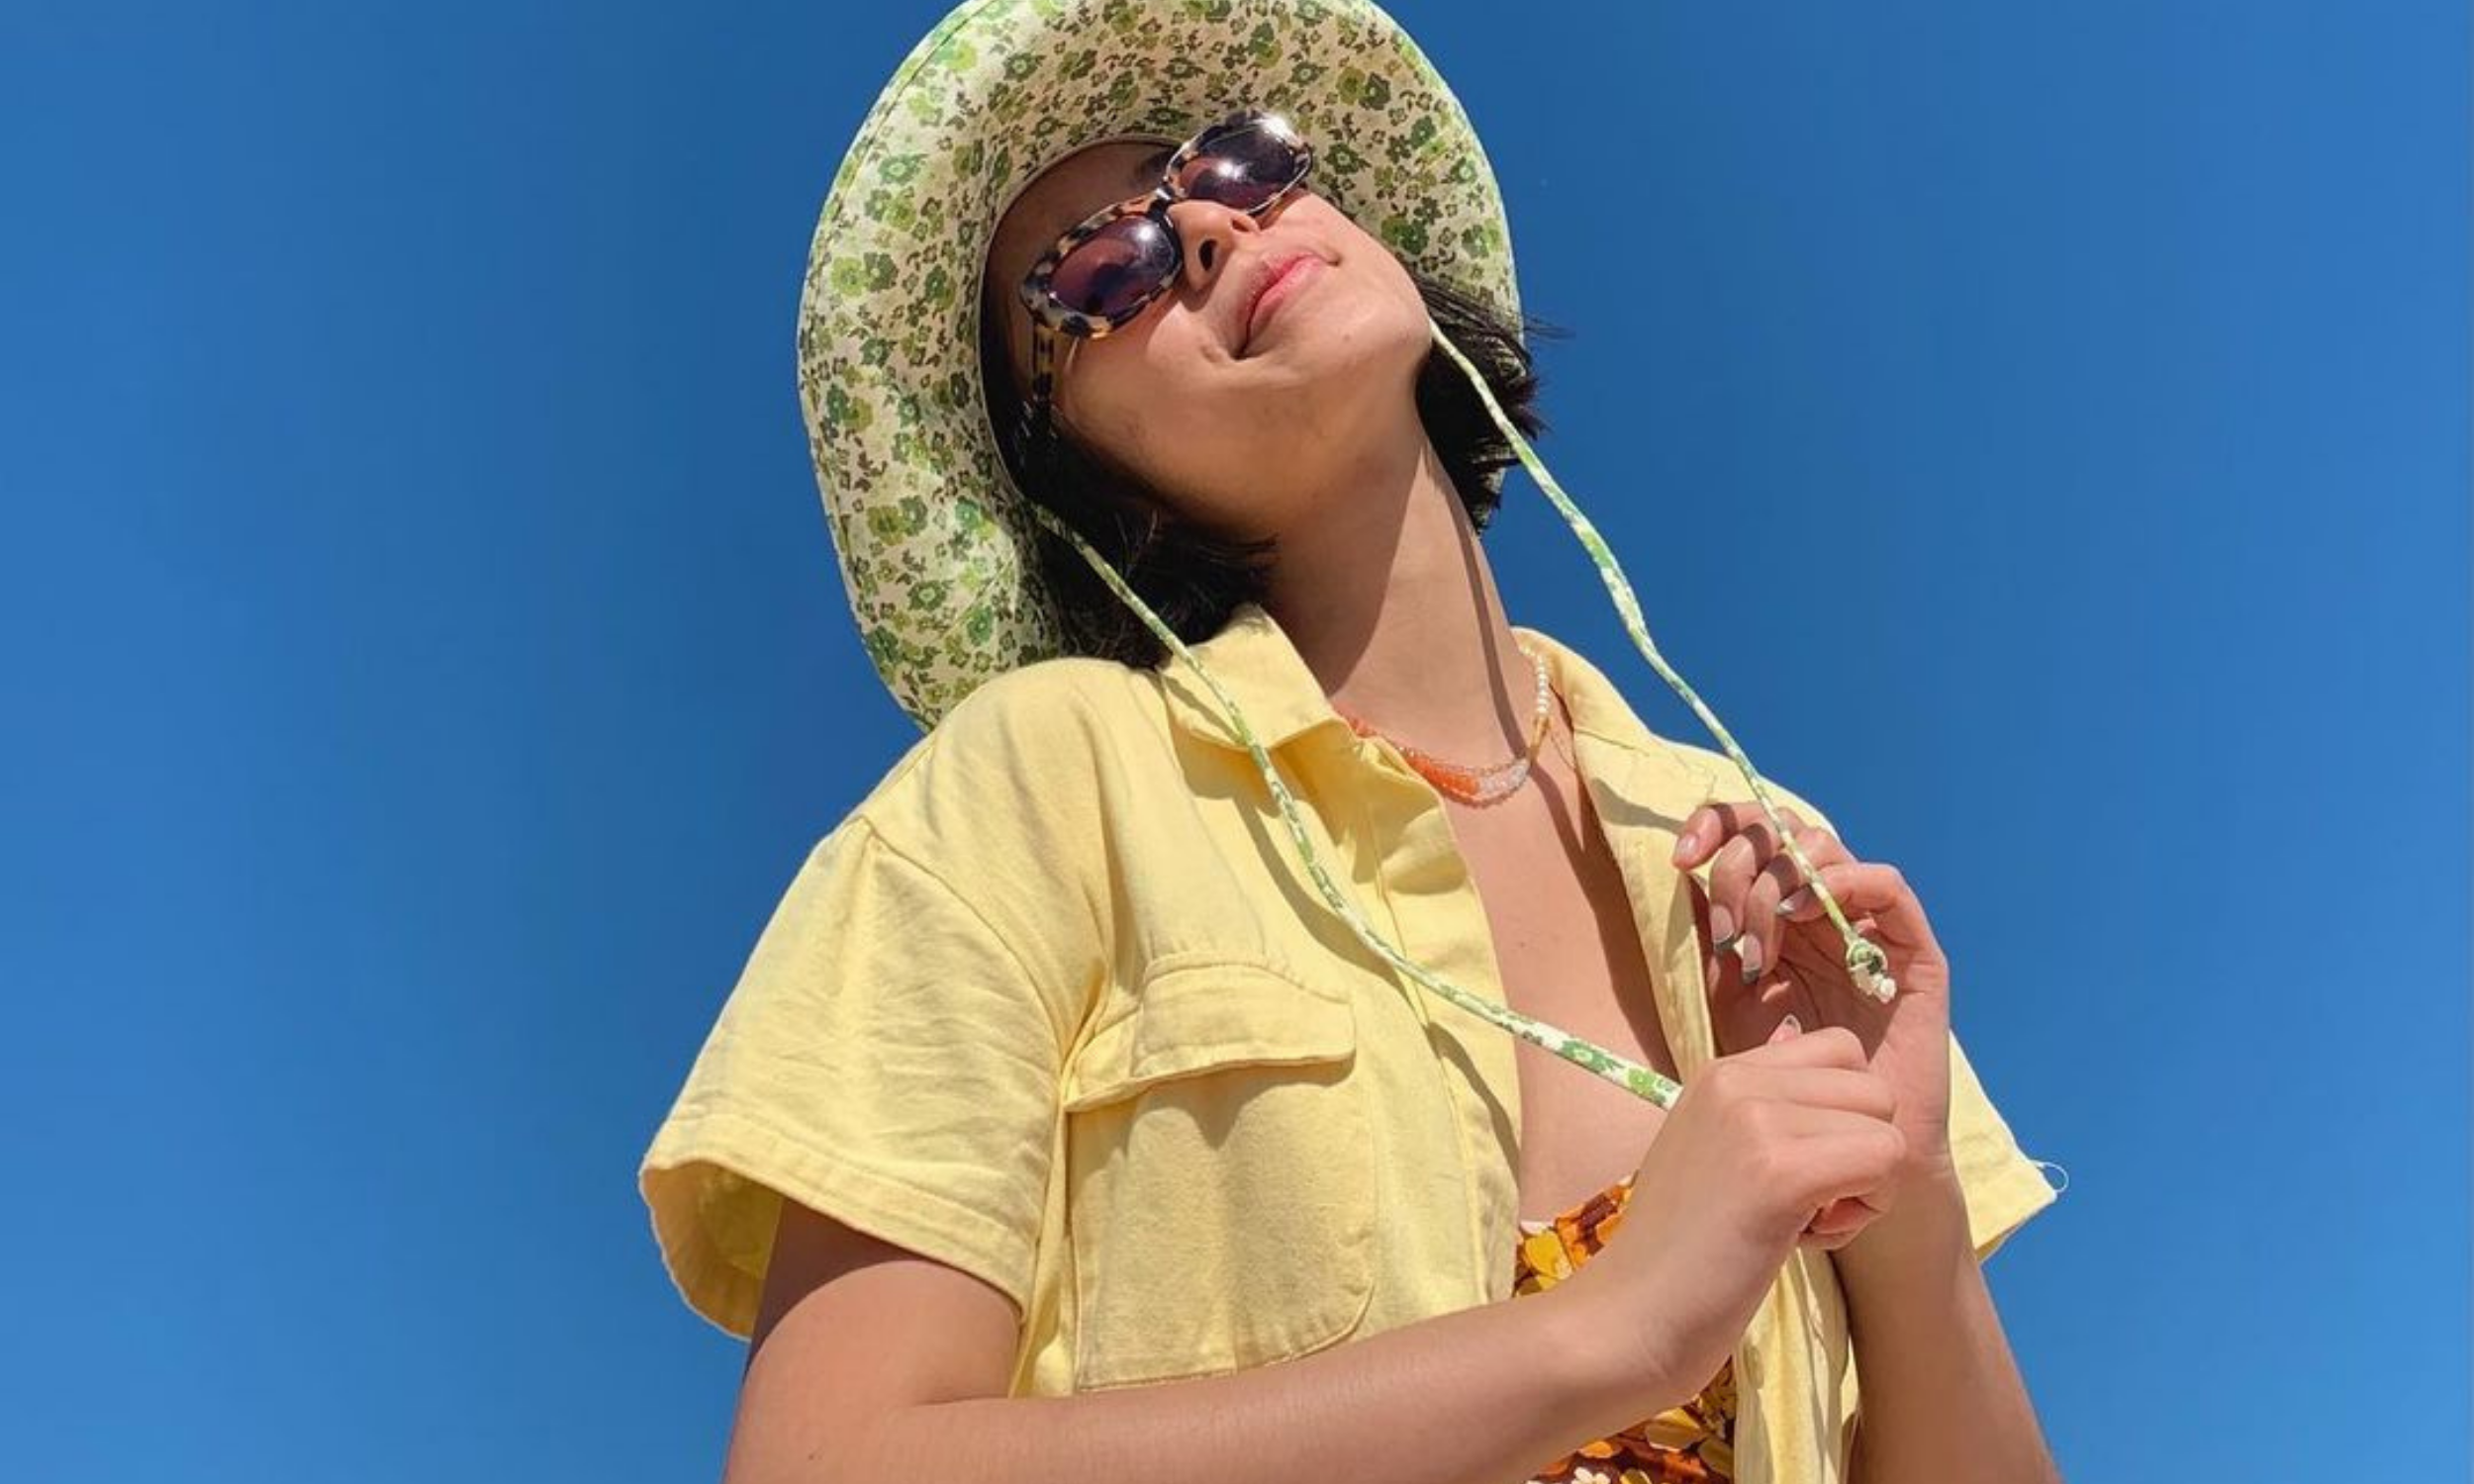 Maggie Zhou wearing Ultra Violette Skinscreen with a yellow top and yellow bucket hat.